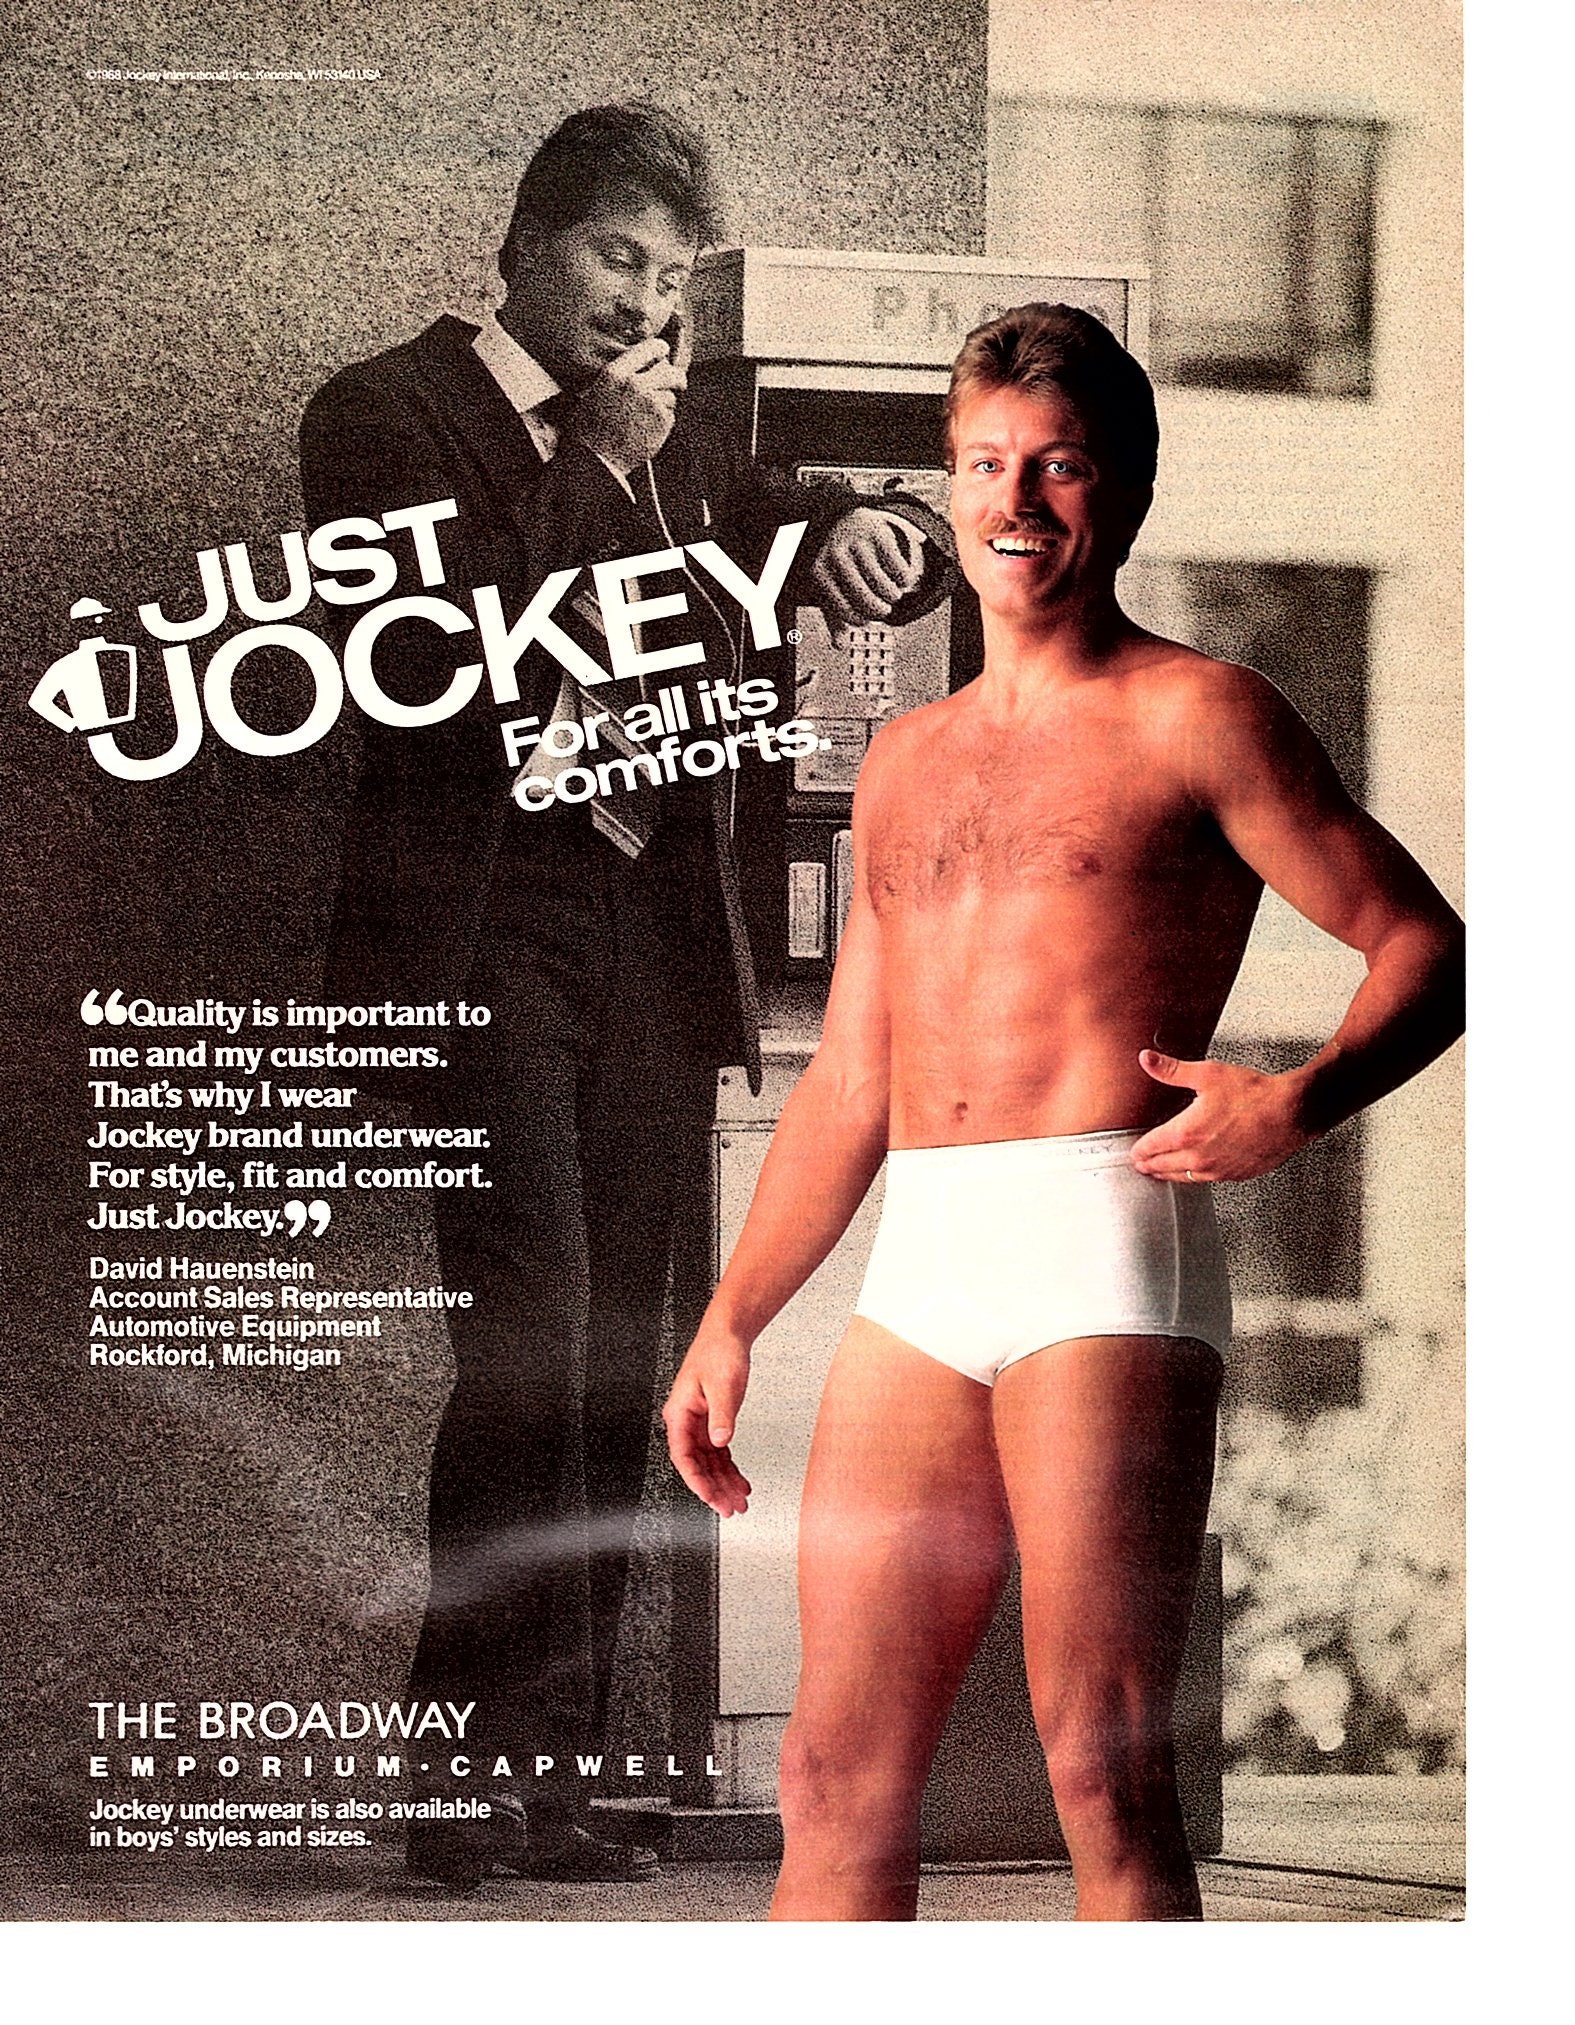 1988 ad for Jockey for Her intimates. - ™